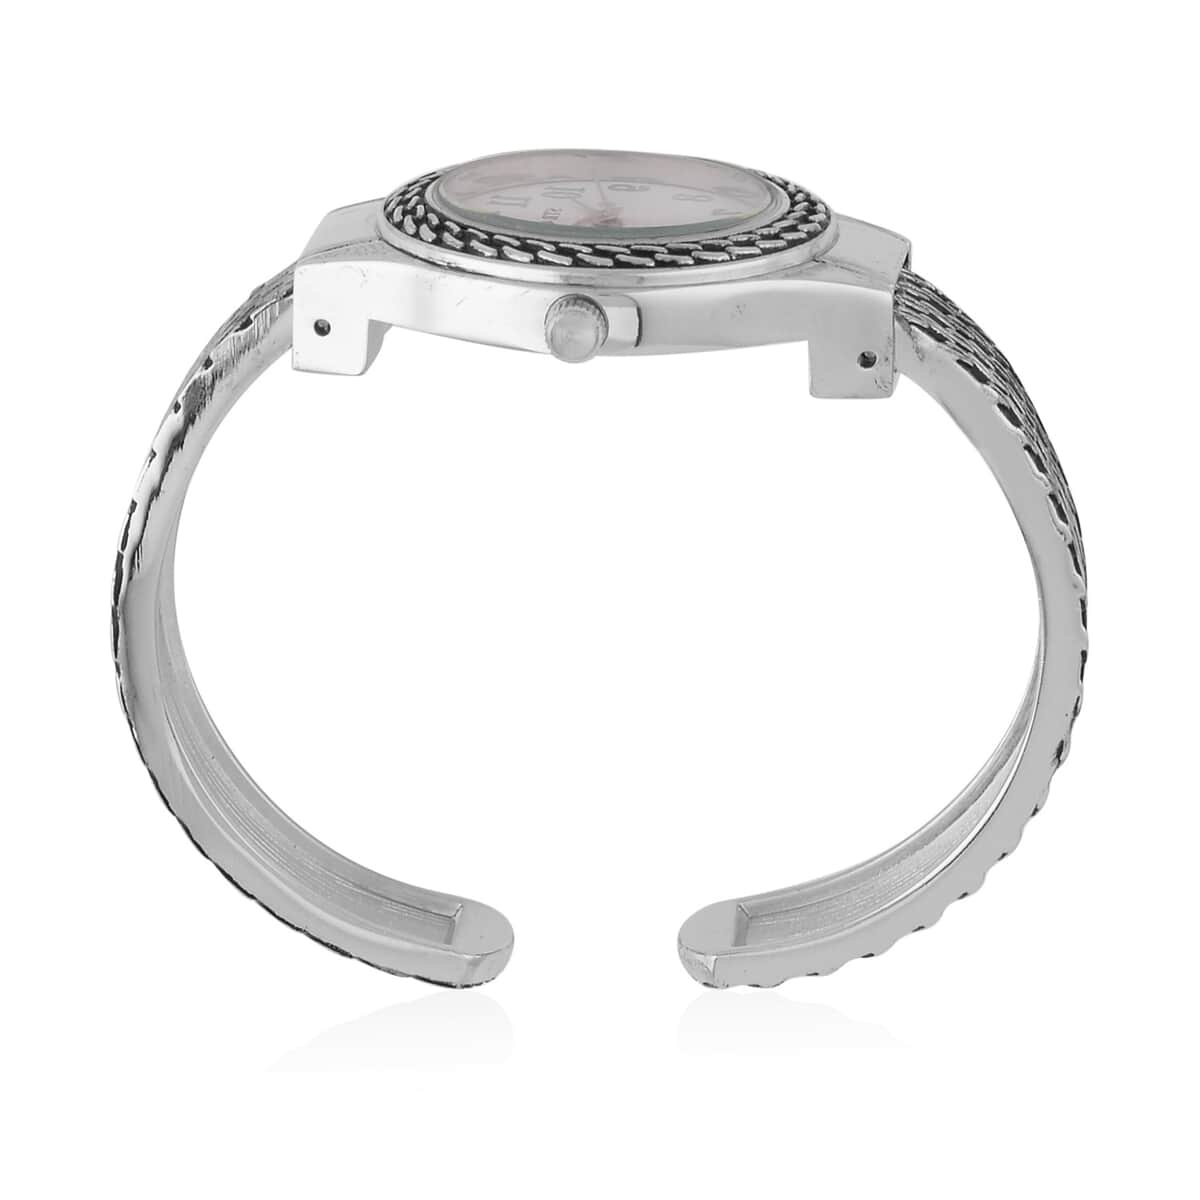 Strada Japanese Movement Cuff Watch in Black Oxidized Silvertone with Stainless Steel Back (26.67-33.27mm) image number 6